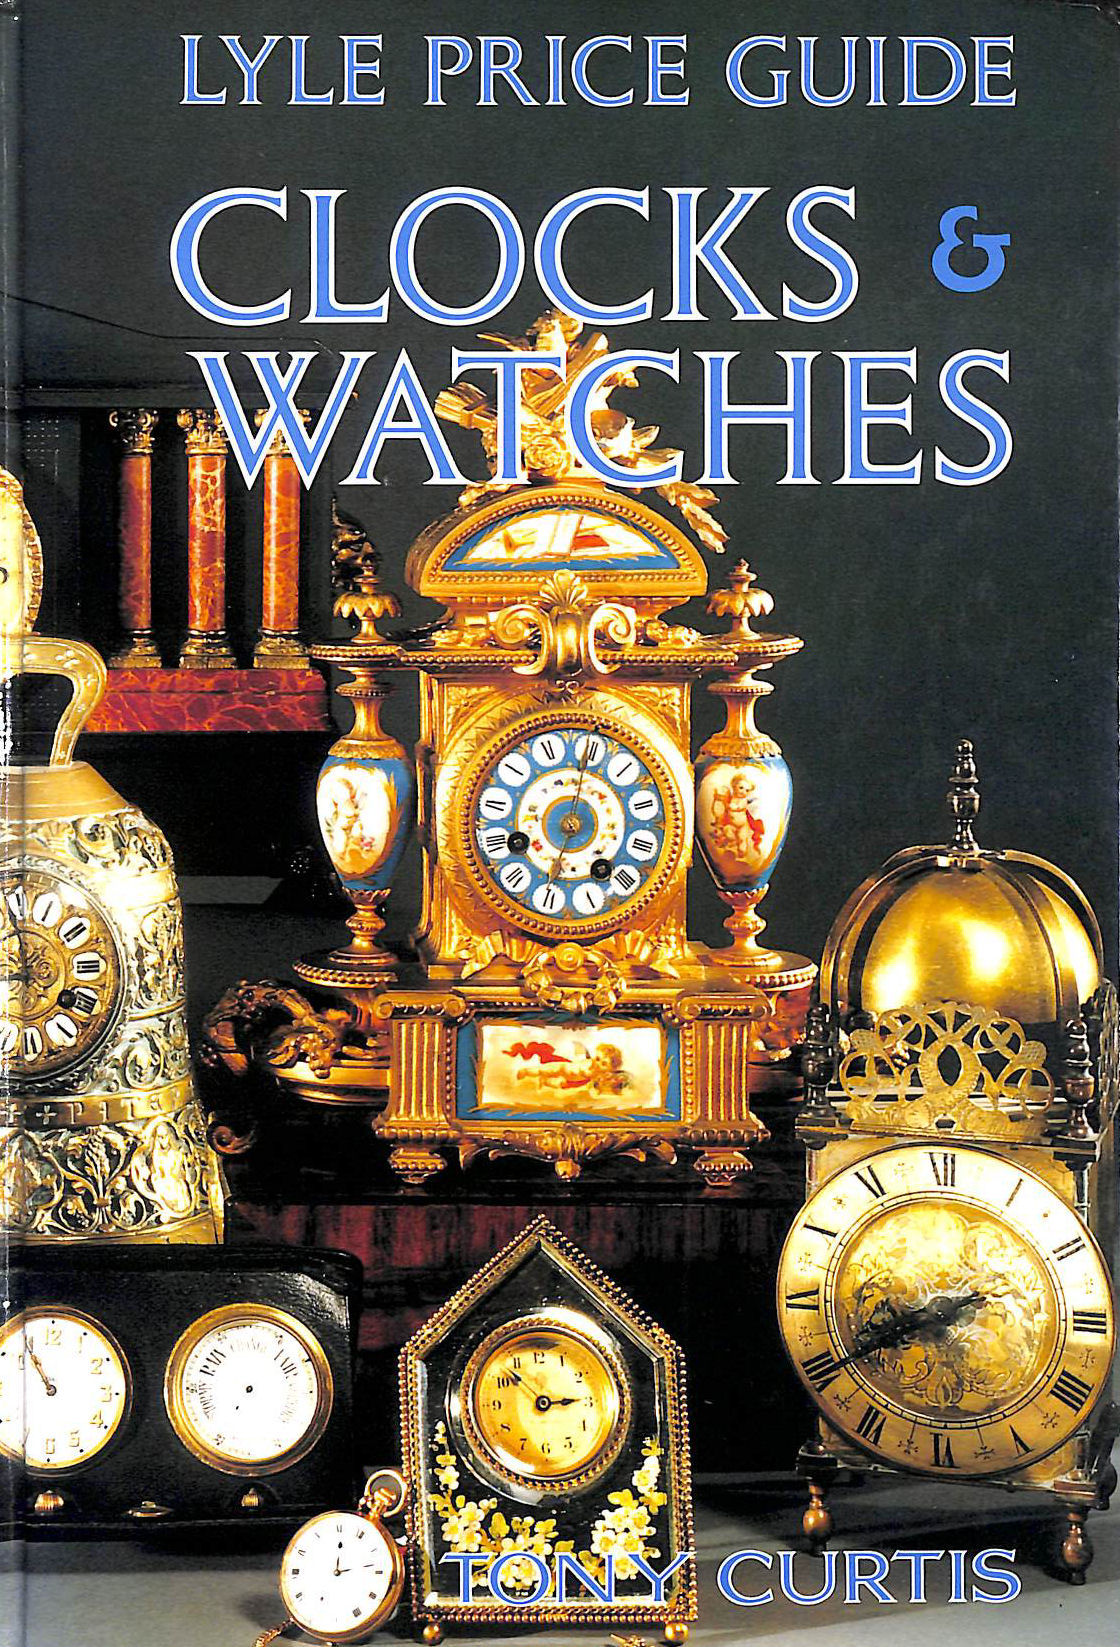 CURTIS, TONY [EDITOR] - Lyle Price Guide: Clocks and Watches